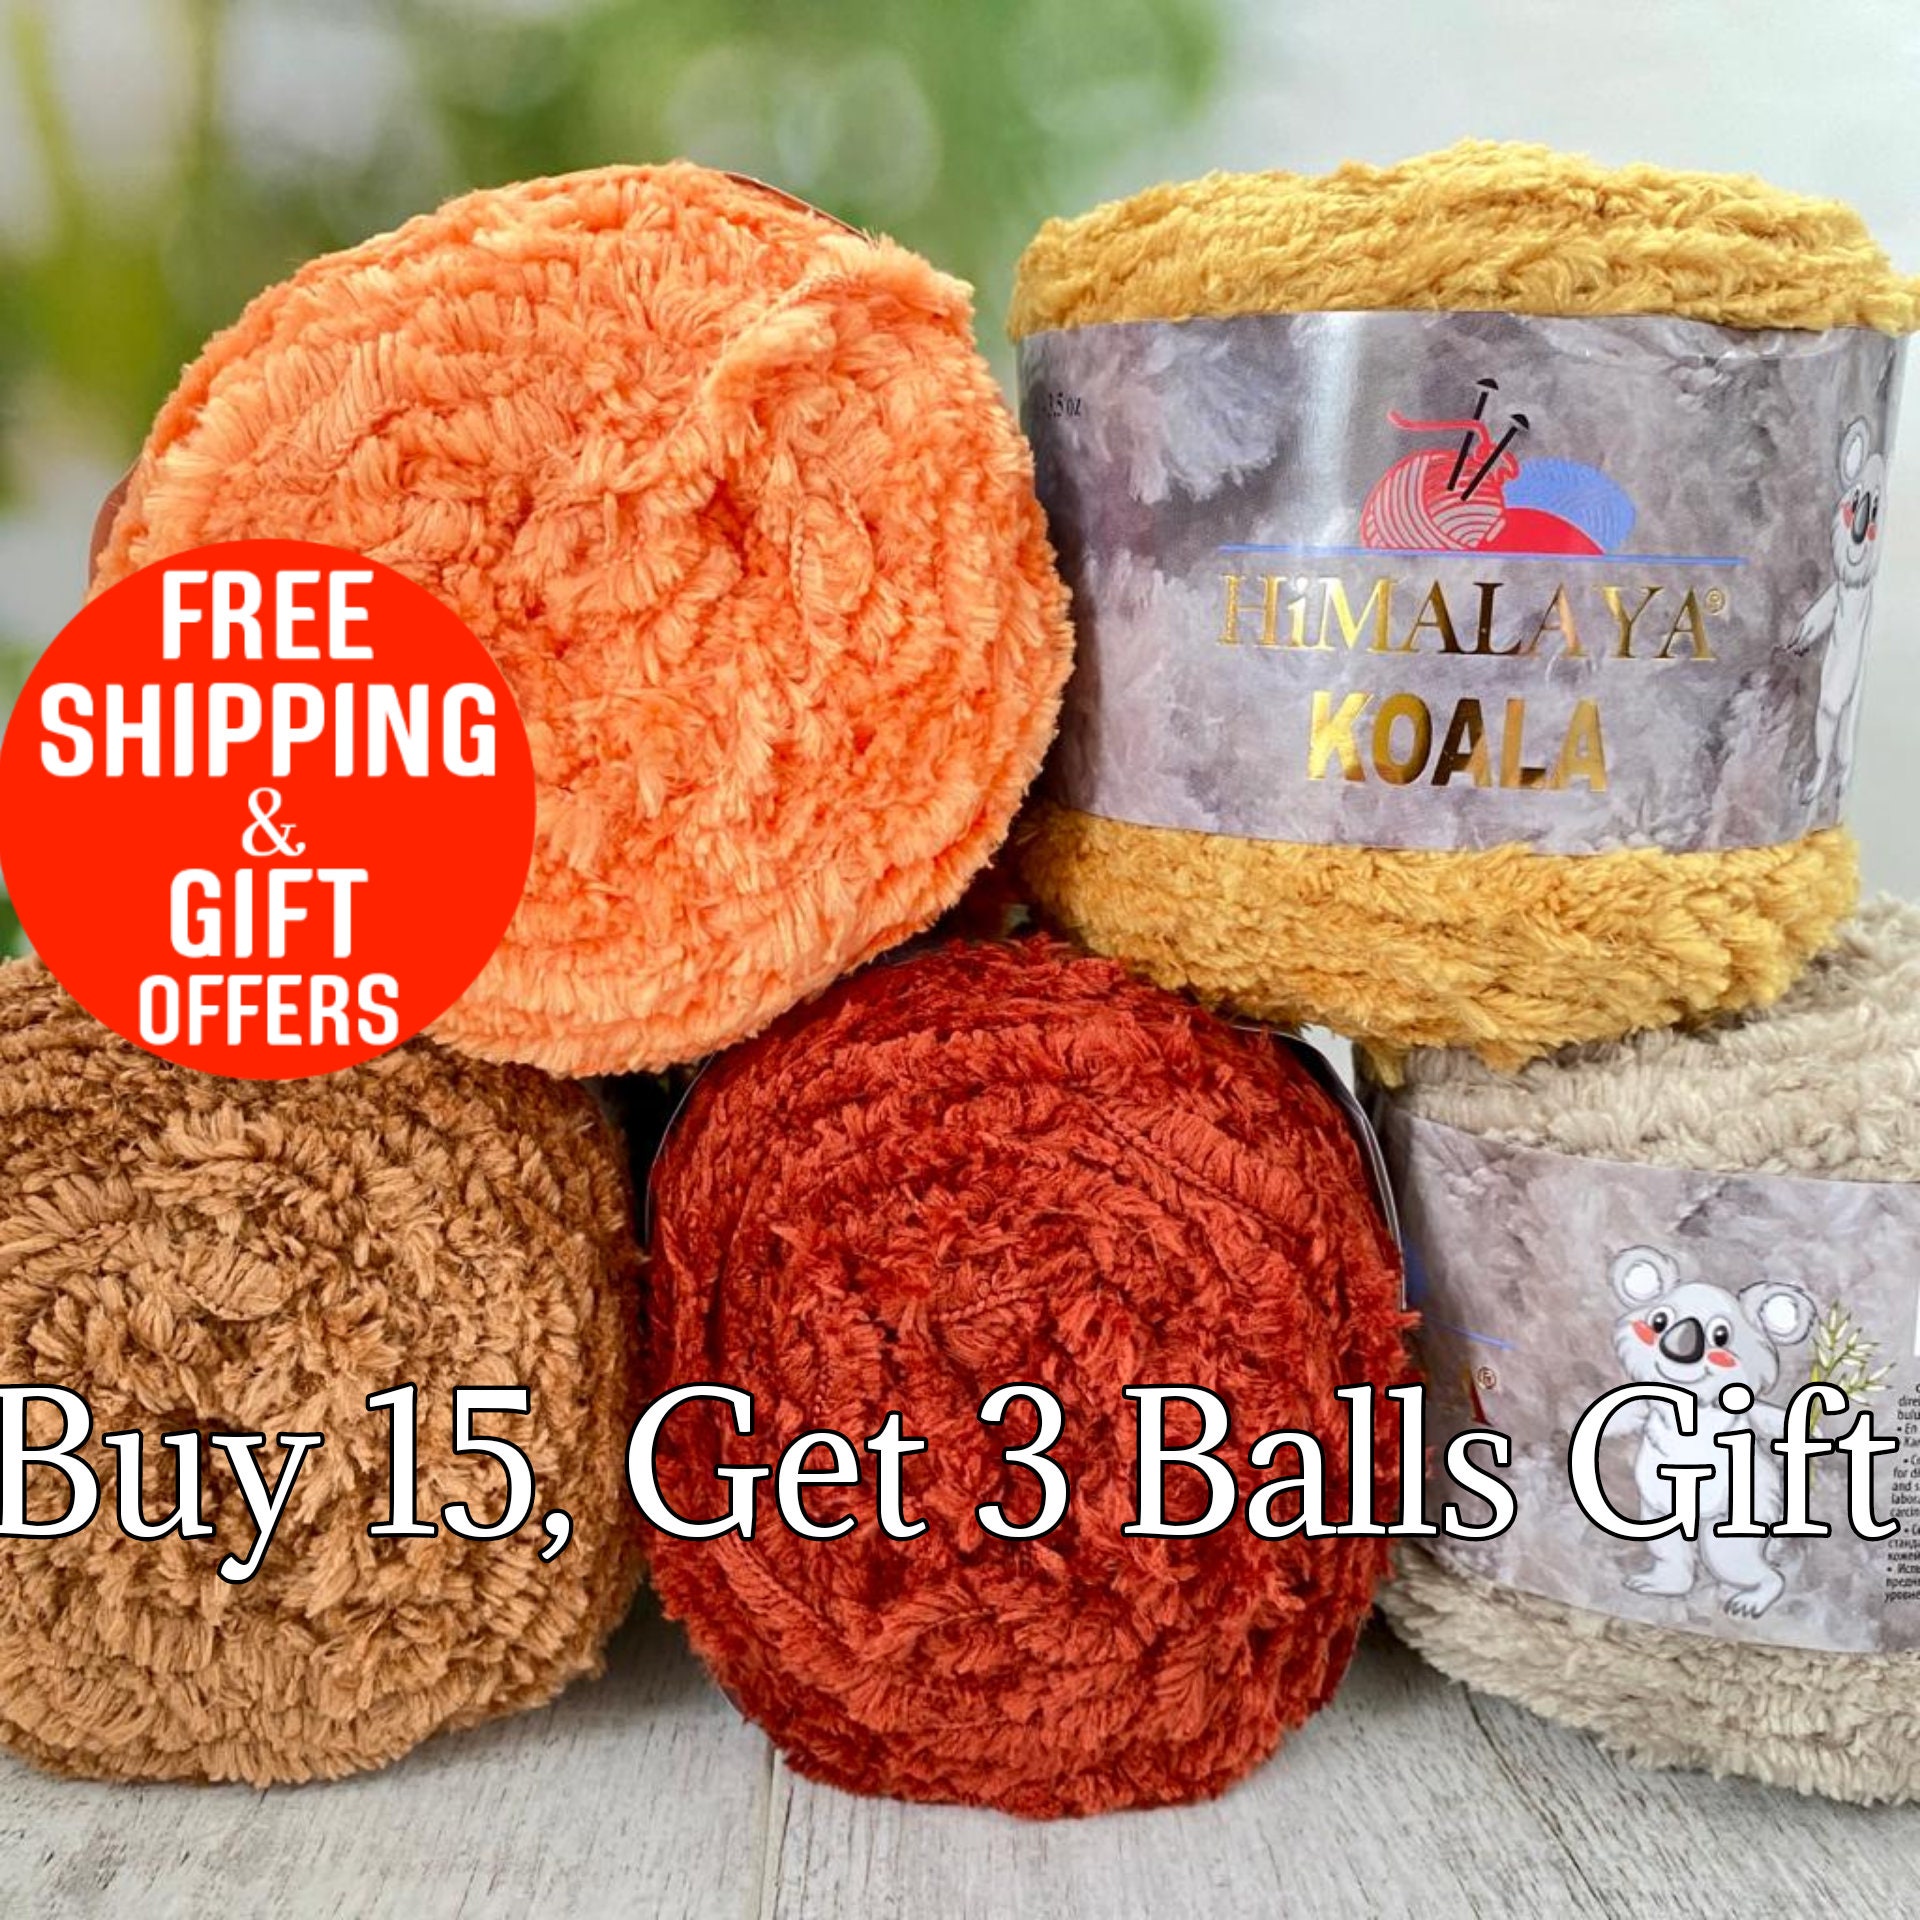 1 Ball Of Gradient Acrylic Yarn For Crocheting Shoes, Sandals, Baby Wear,  Etc.